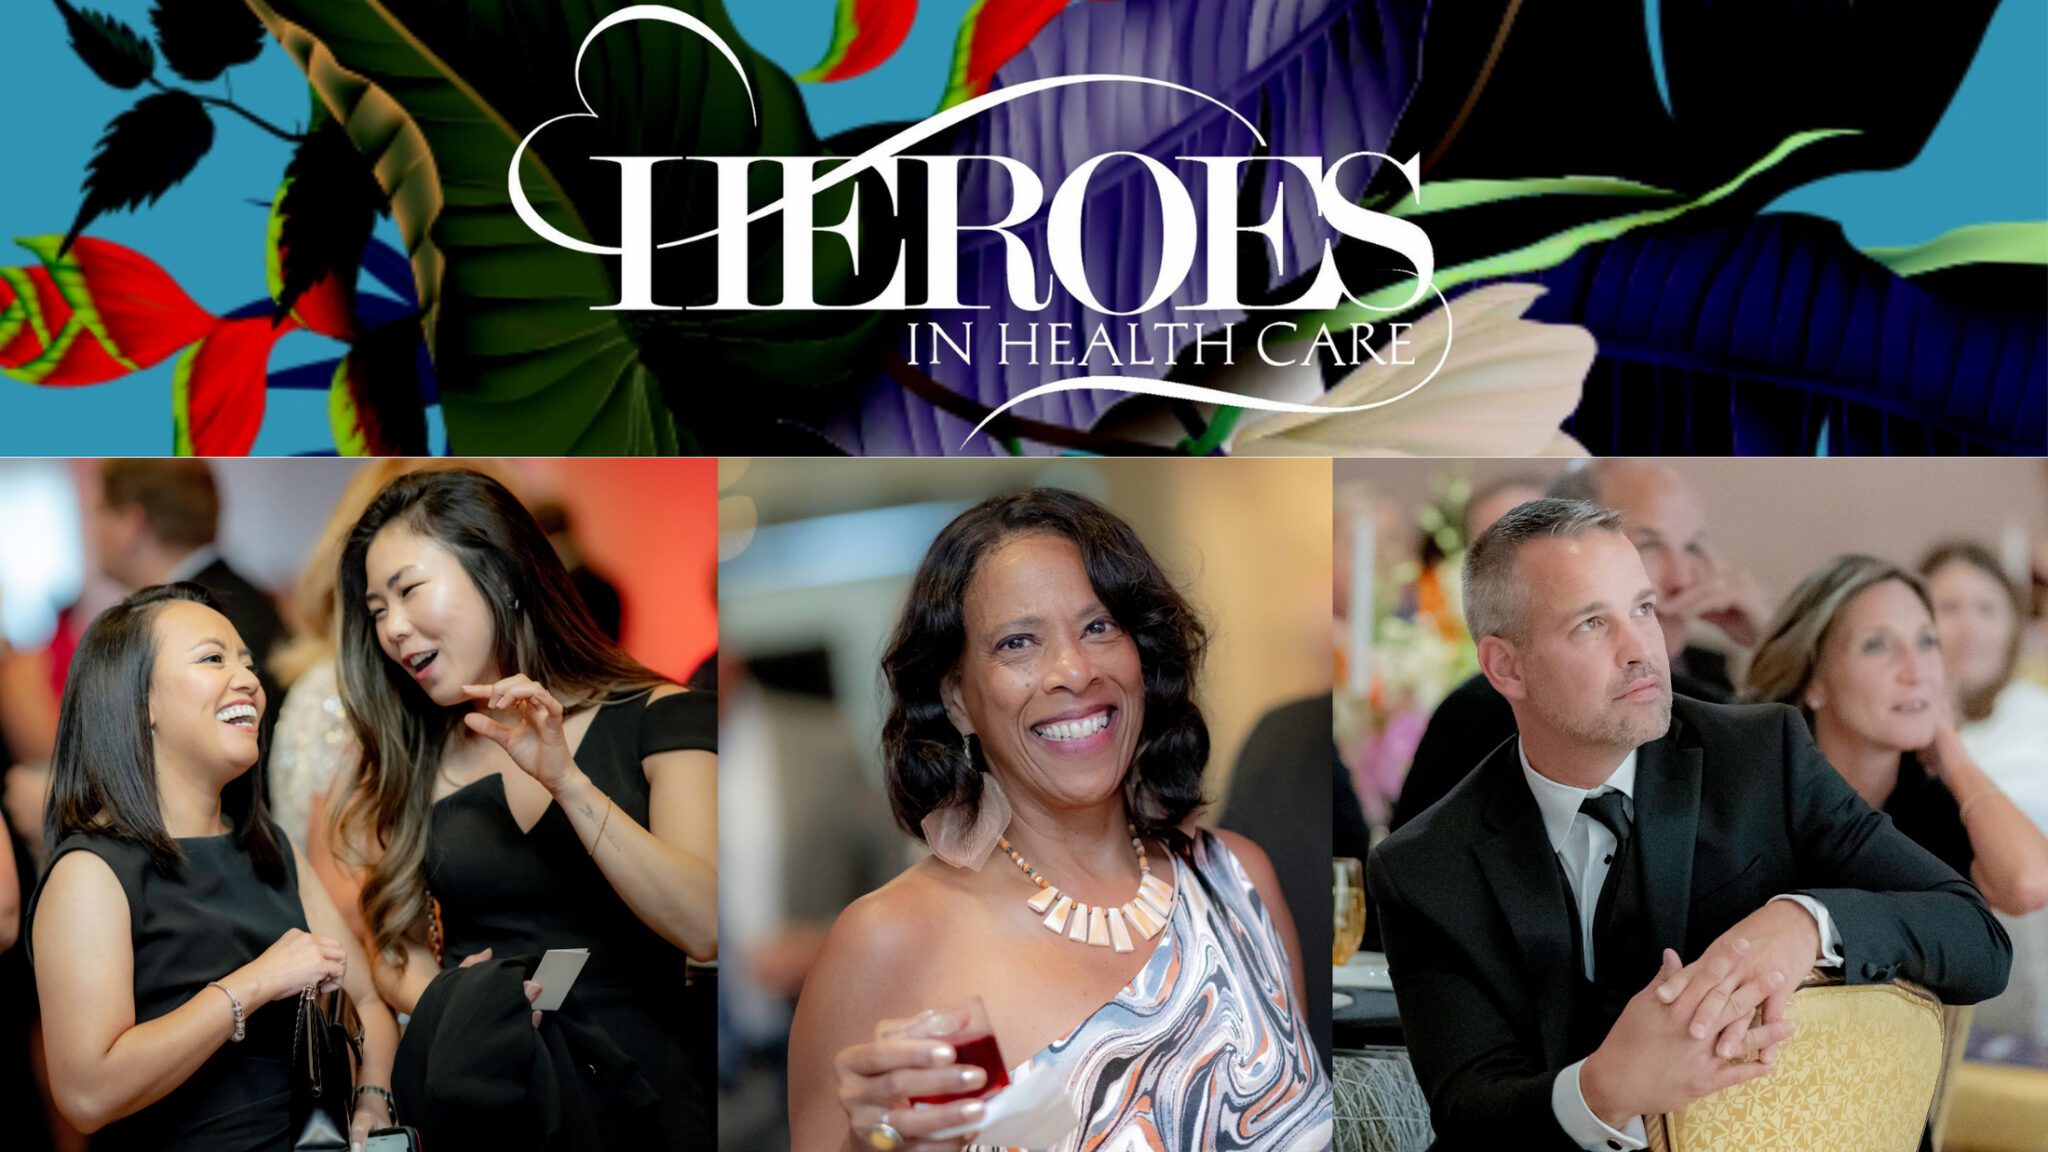 Heroes in Health Care Gala to Benefit VNA Care’s Nursing Services